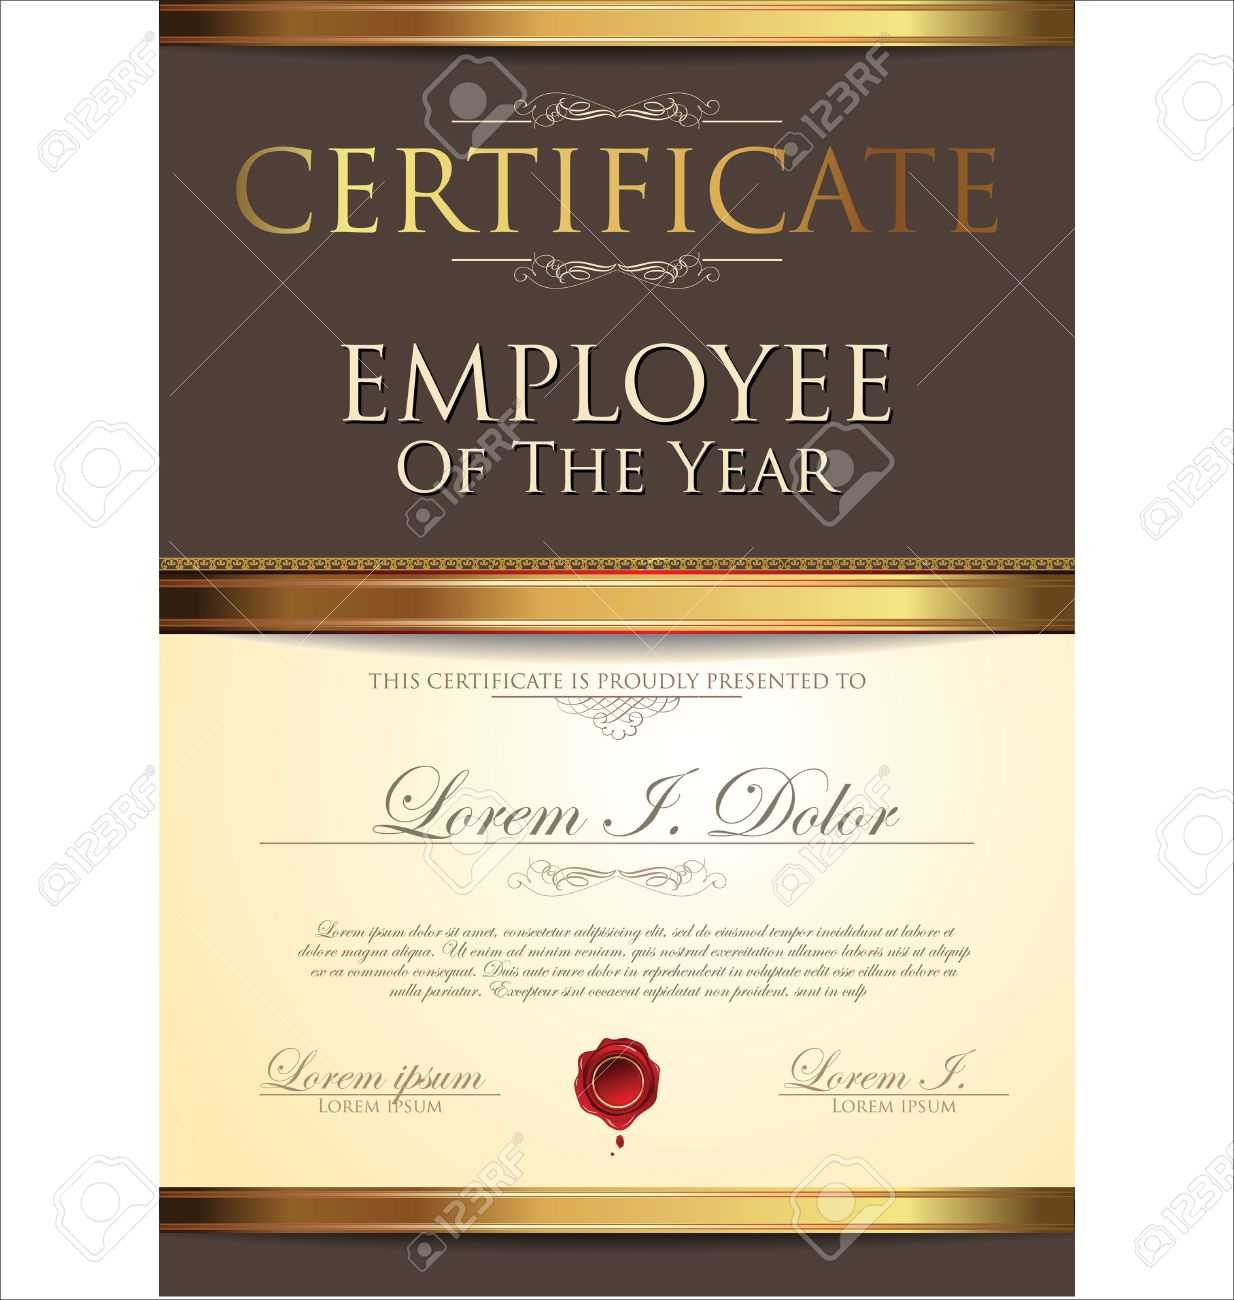 Certificate Template, Employee Of The Year With Regard To Employee Of The Year Certificate Template Free